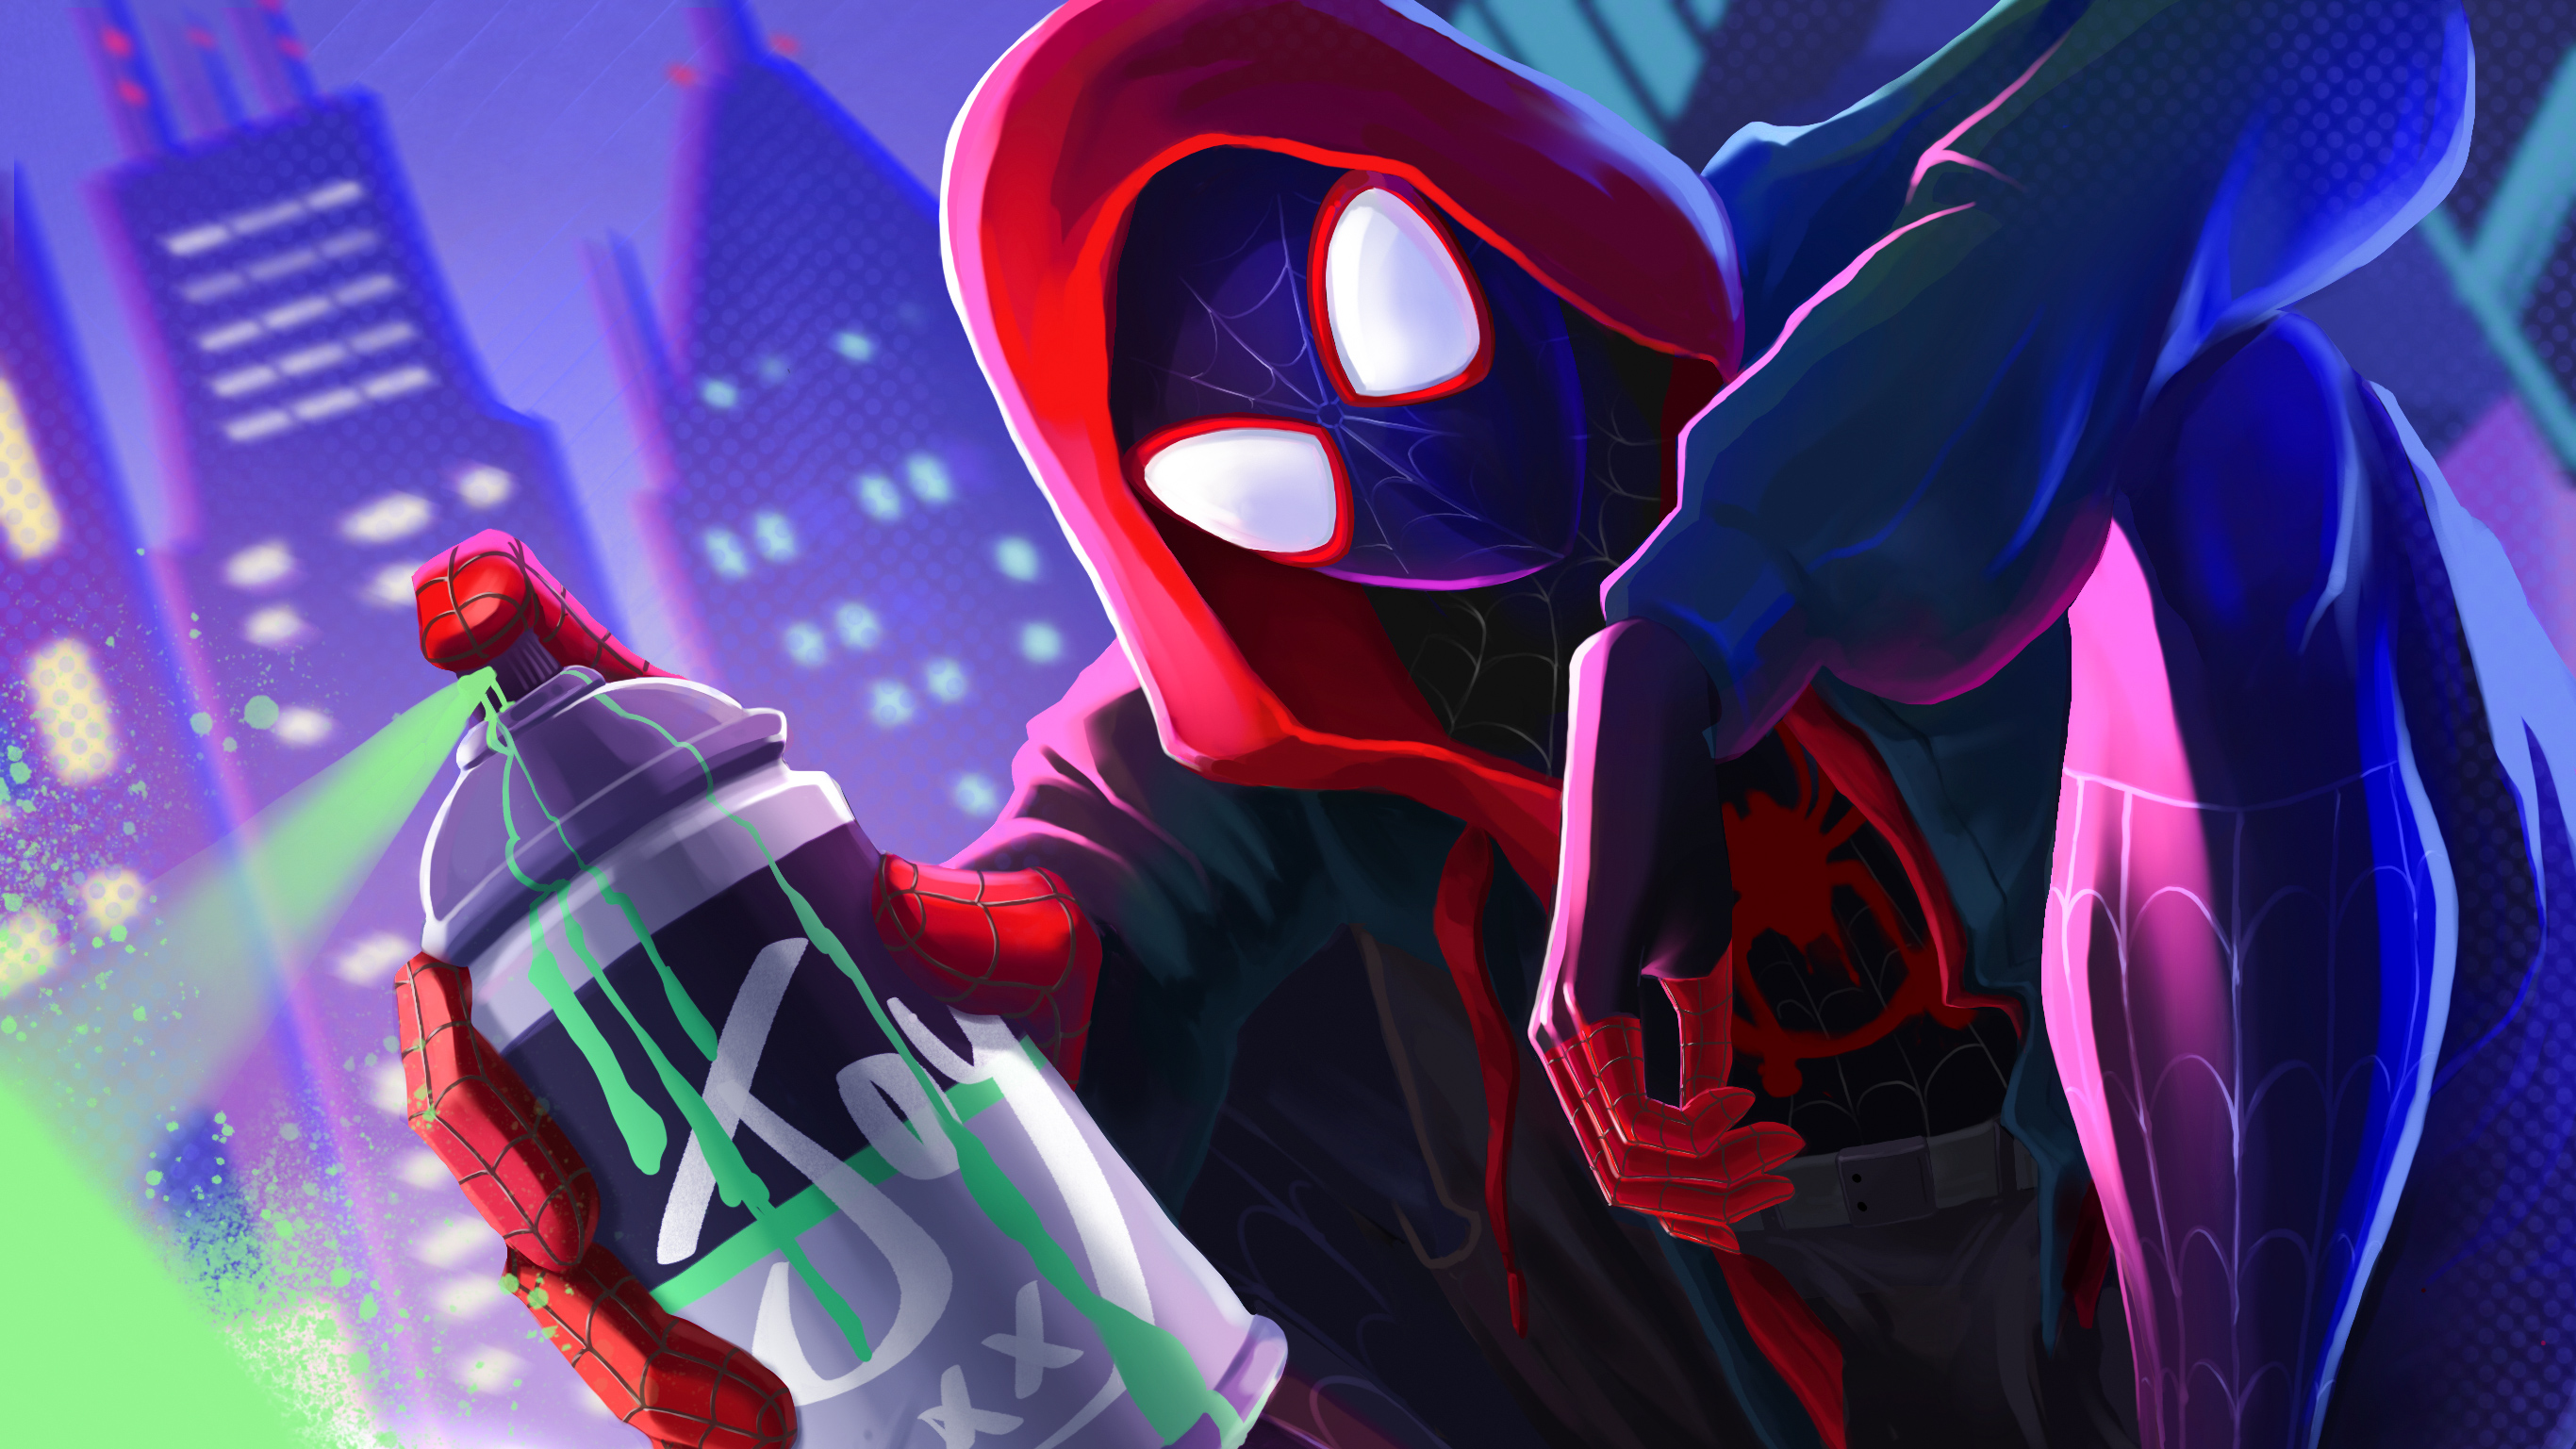 New Lock Screen Wallpapers miles morales, spider man: into the spider verse, spider man, movie